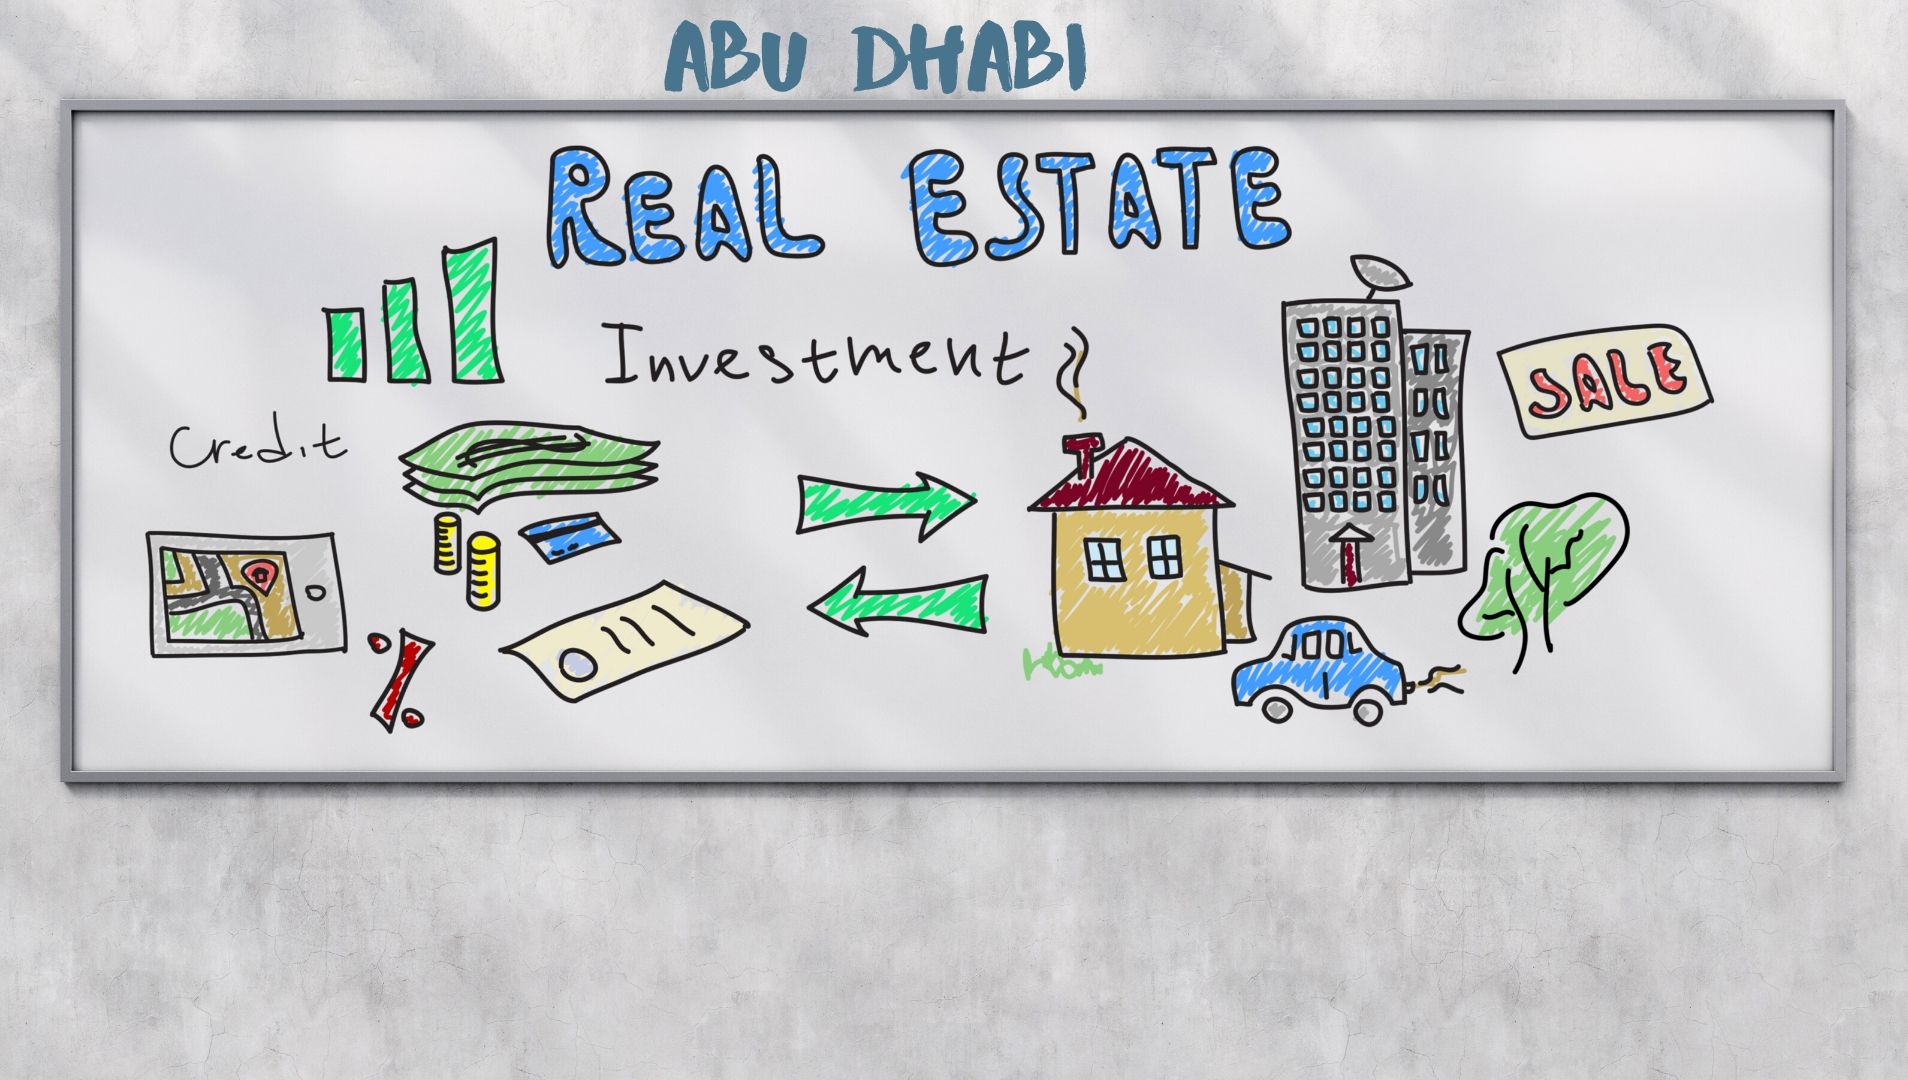 Open a Real Estate Company in Abu Dhabi